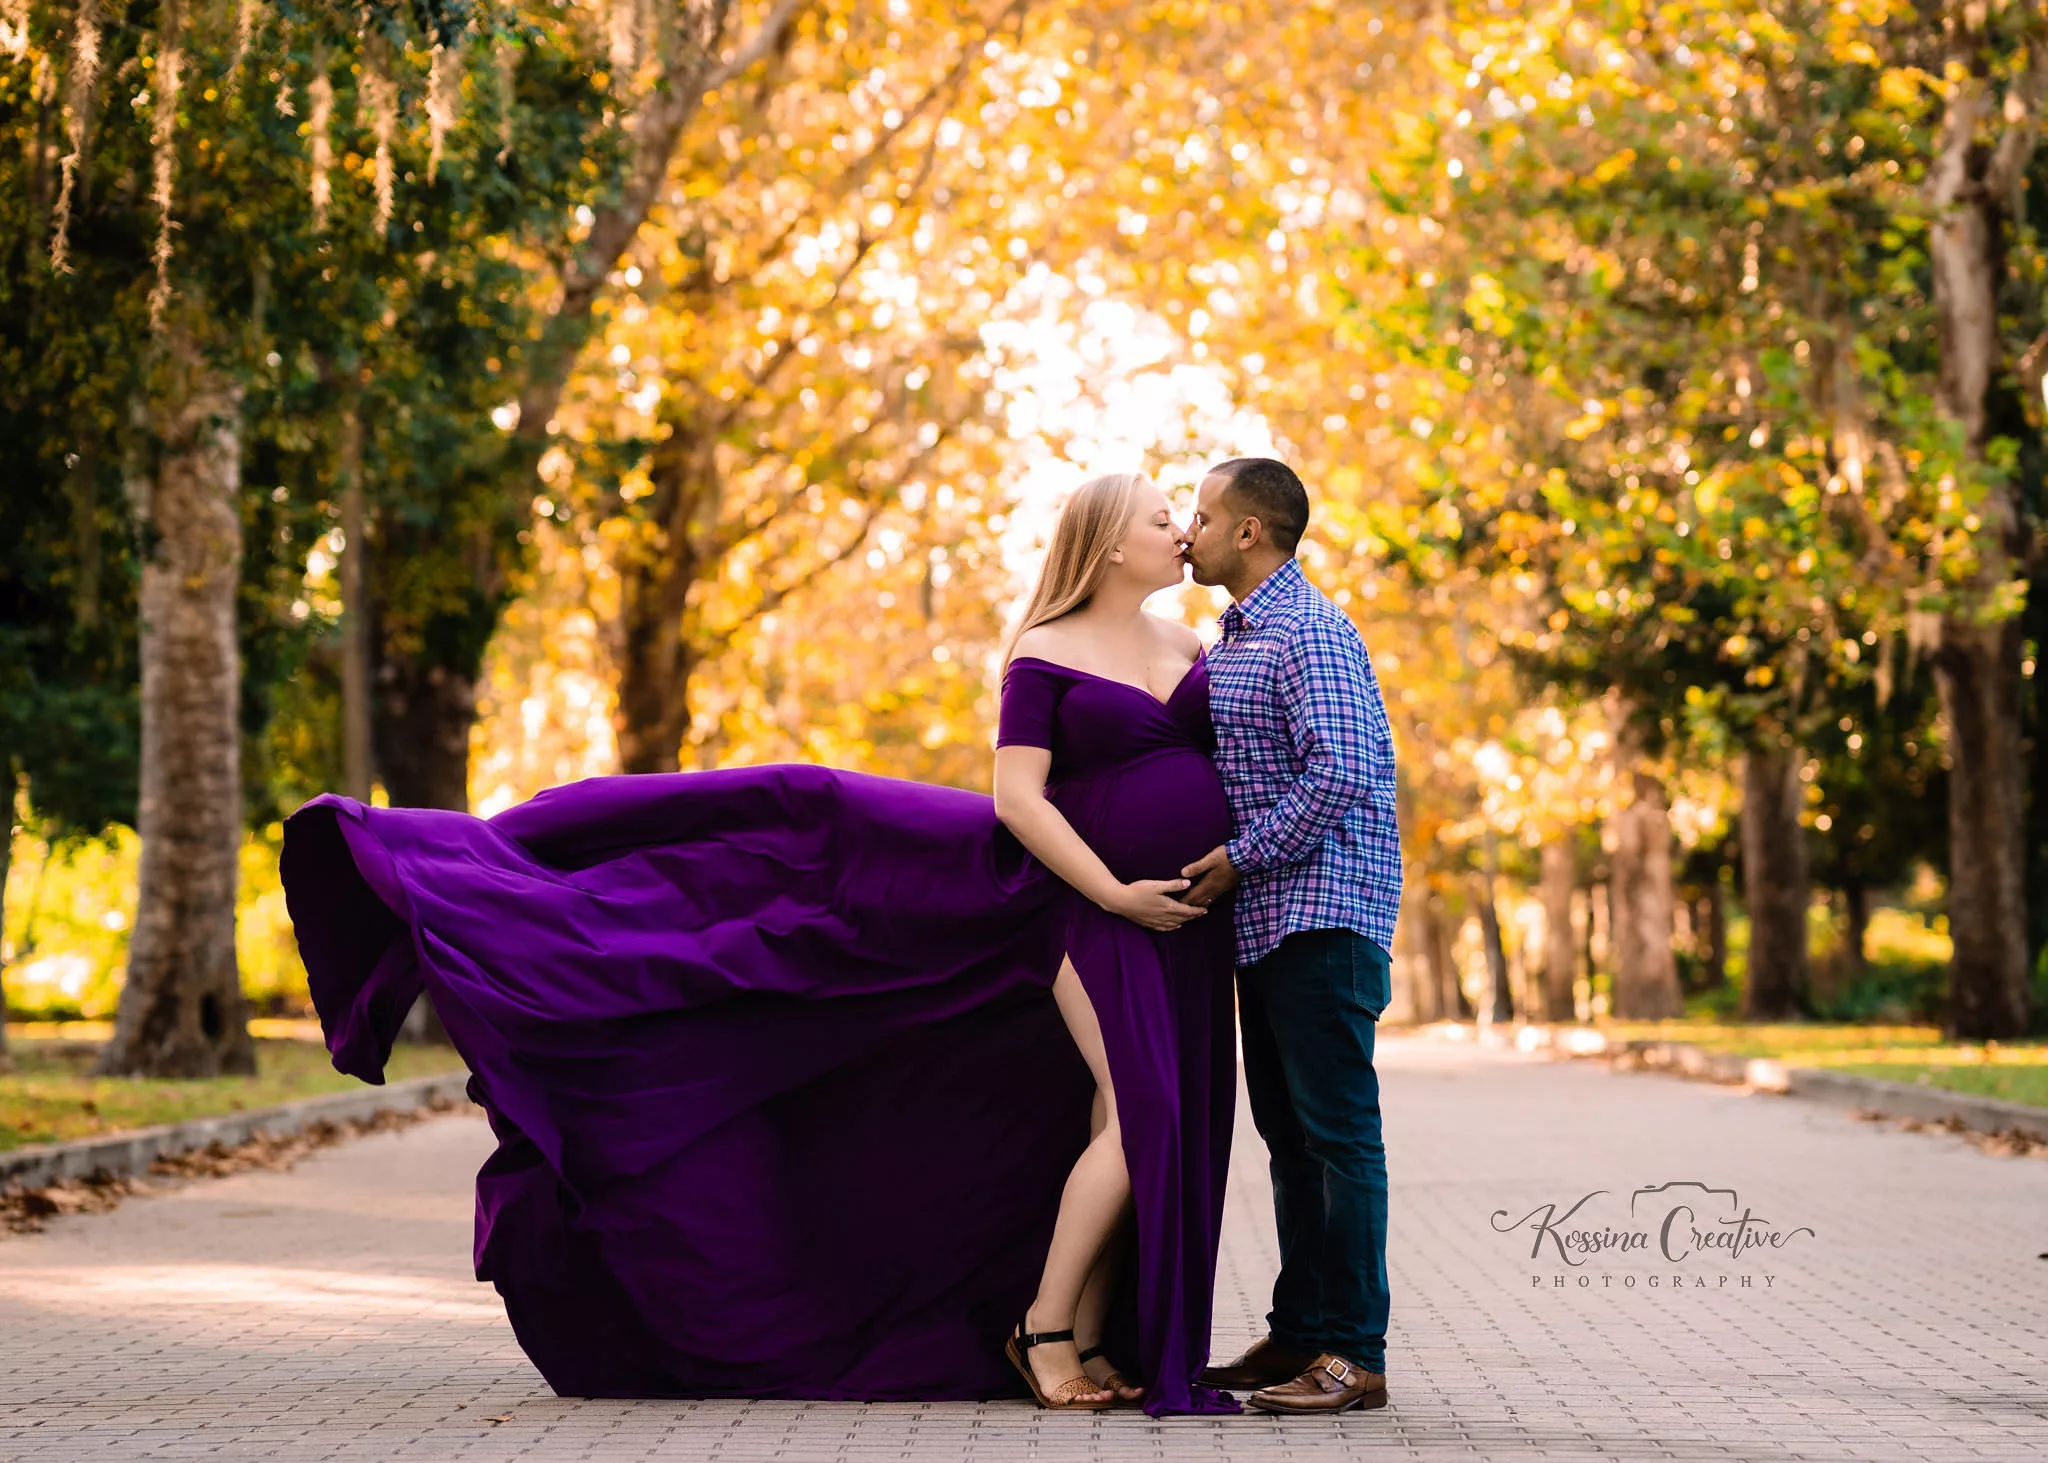 Orlando Maternity Photographer Pregnancy photography meadgardens winter park purple flowy dress with couple